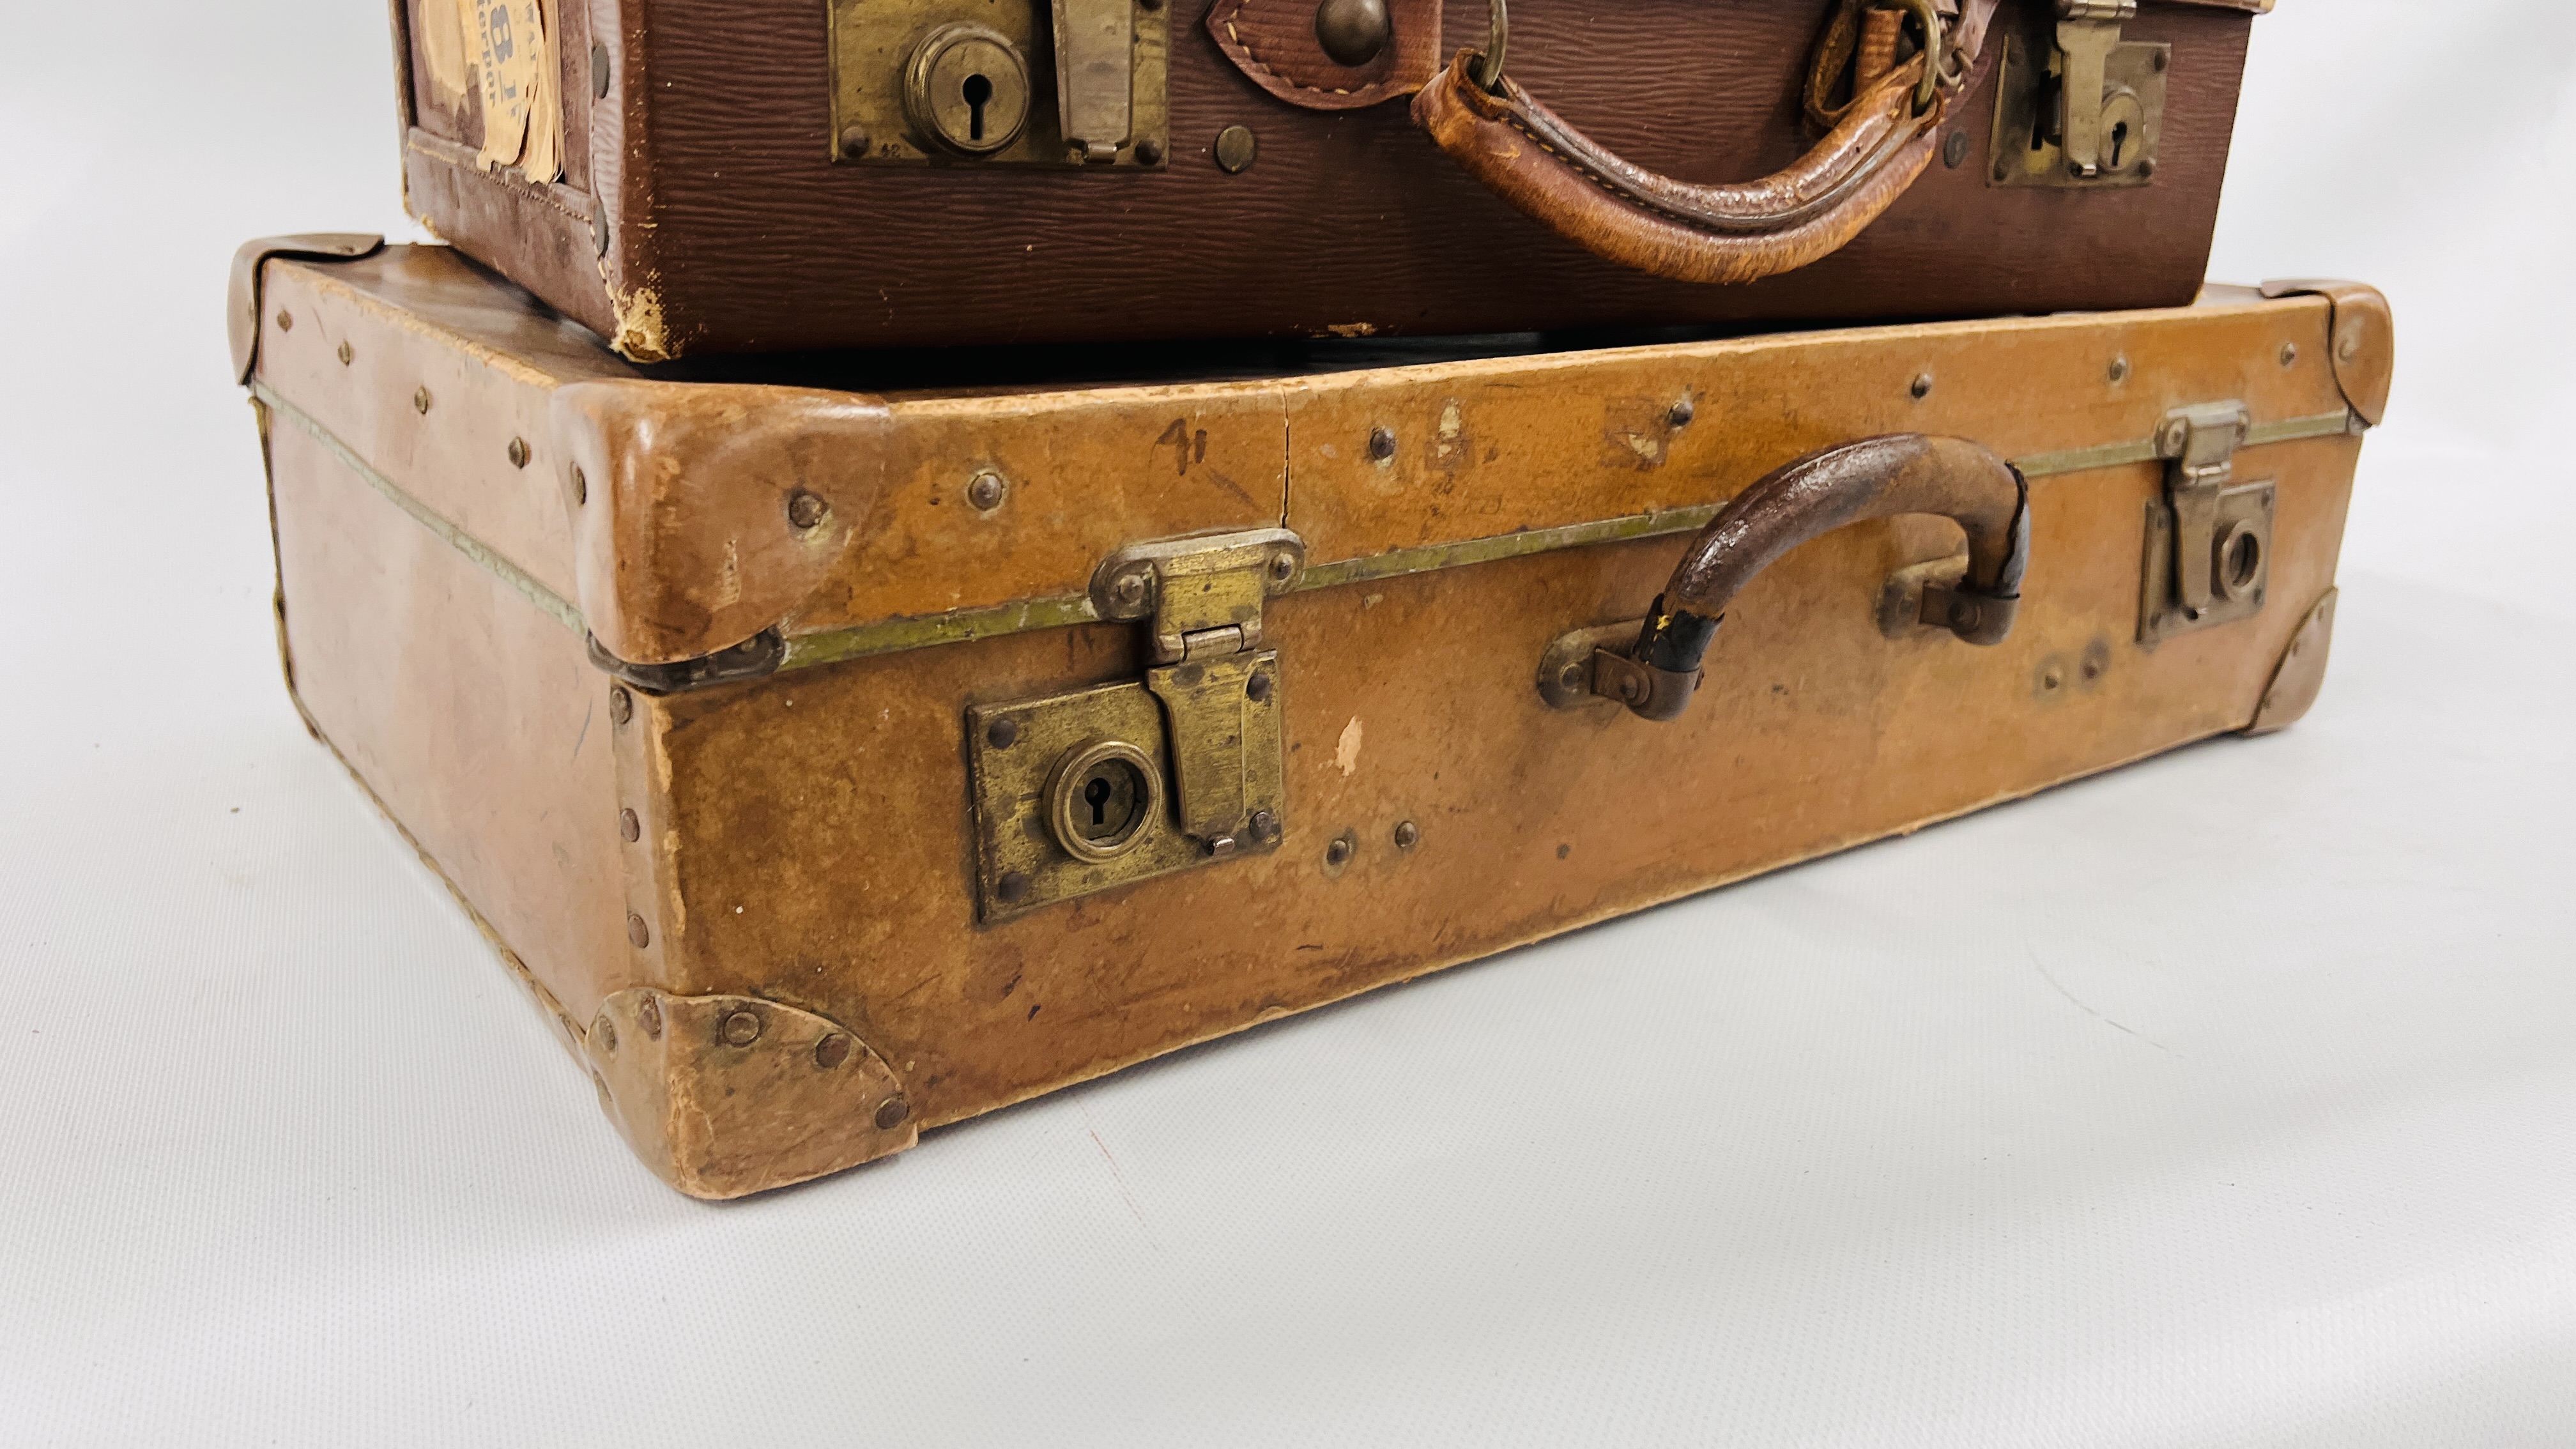 TWO VINTAGE LUGGAGE CASES ALONG WITH A LEATHER DOCUMENT CASE MARKED "BALLY" - Image 5 of 9